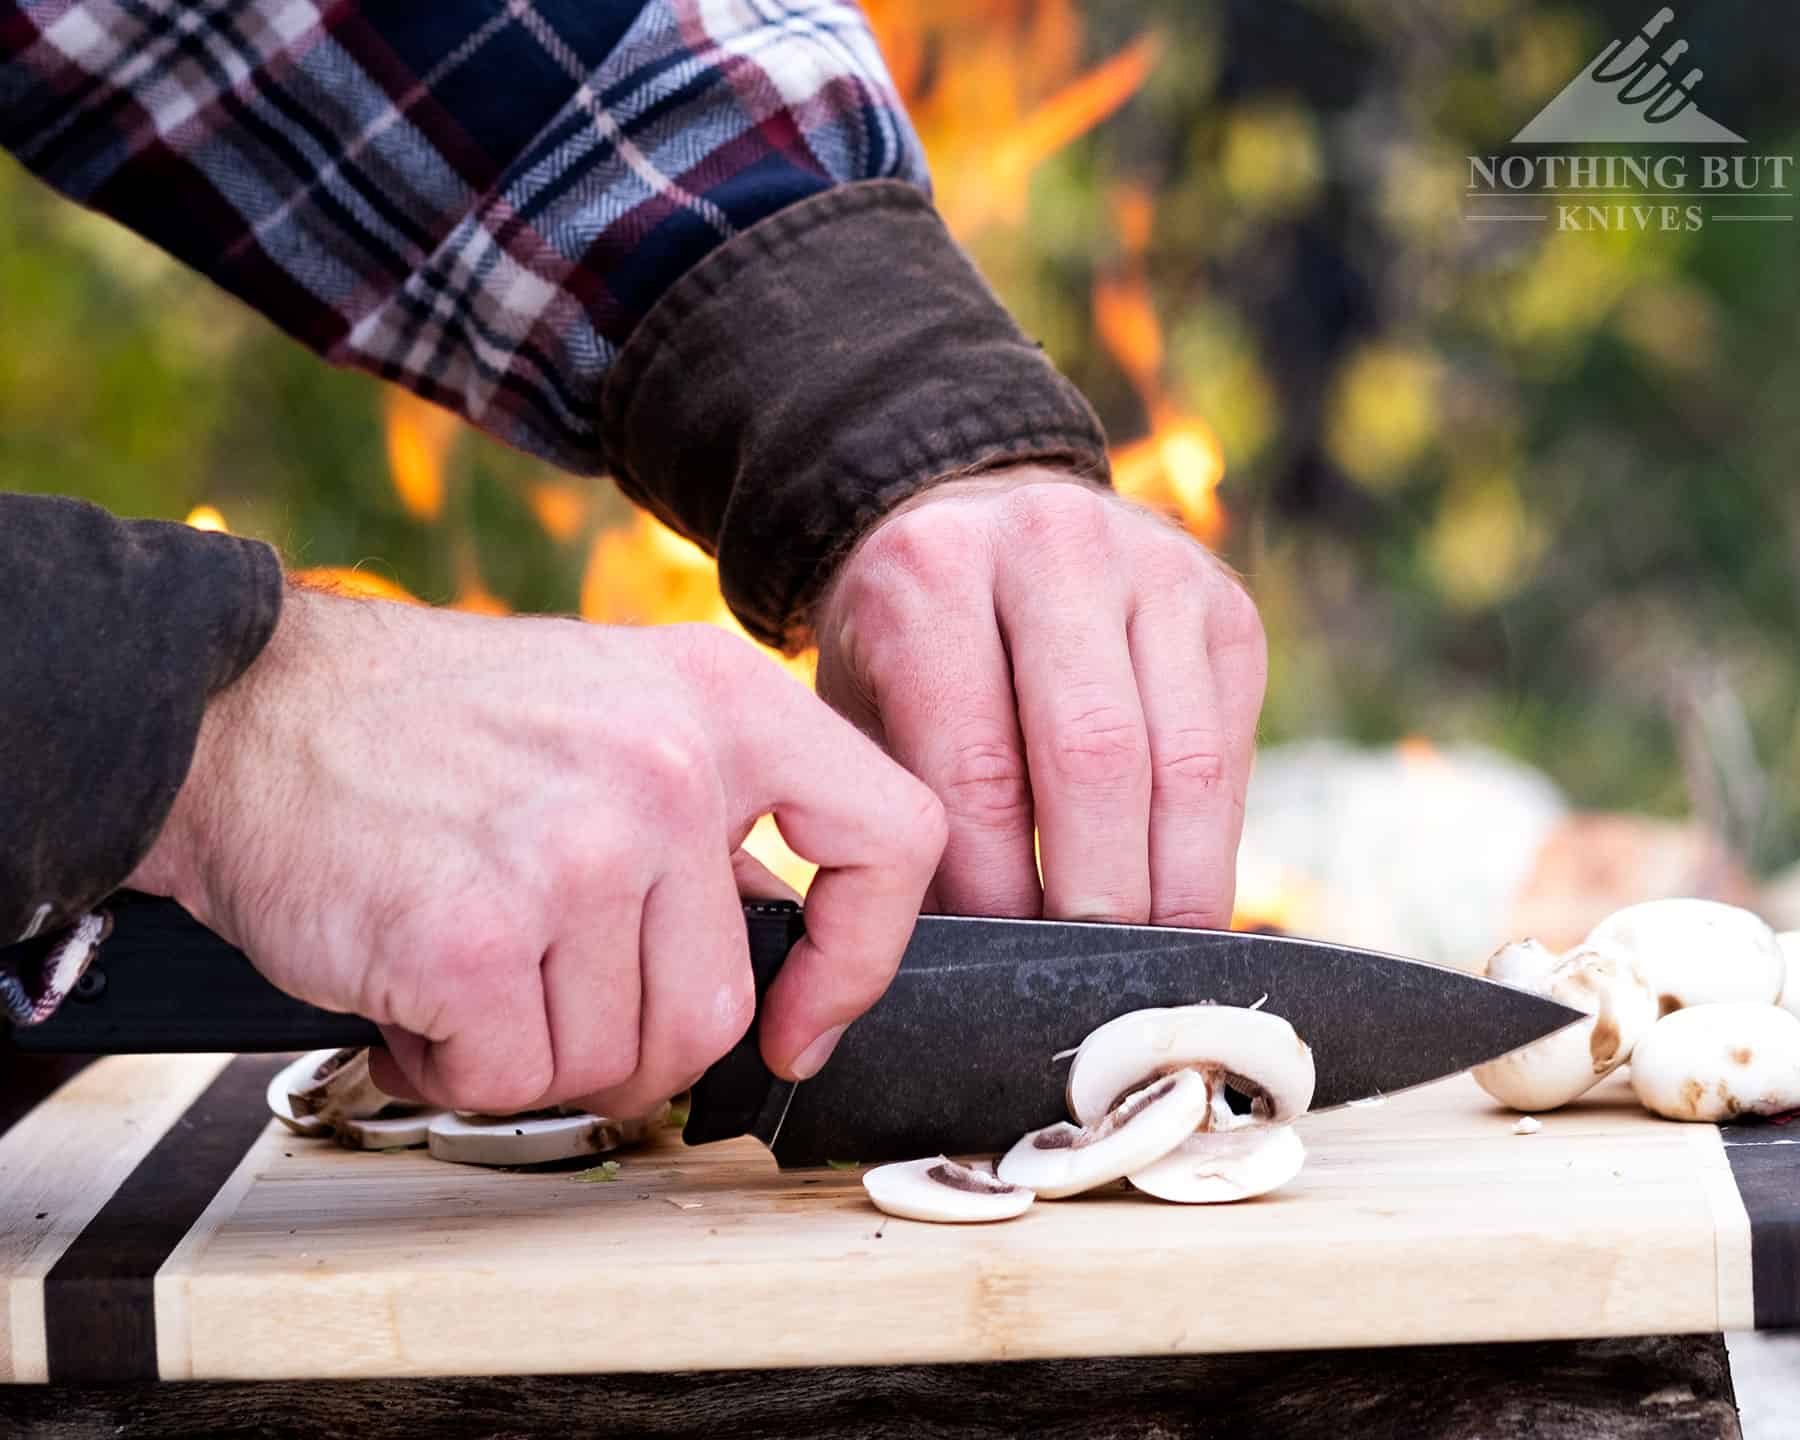 https://www.nothingbutknives.com/wp-content/uploads/2022/03/Camp-Cooking-Knife-from-Off-Grid.jpg